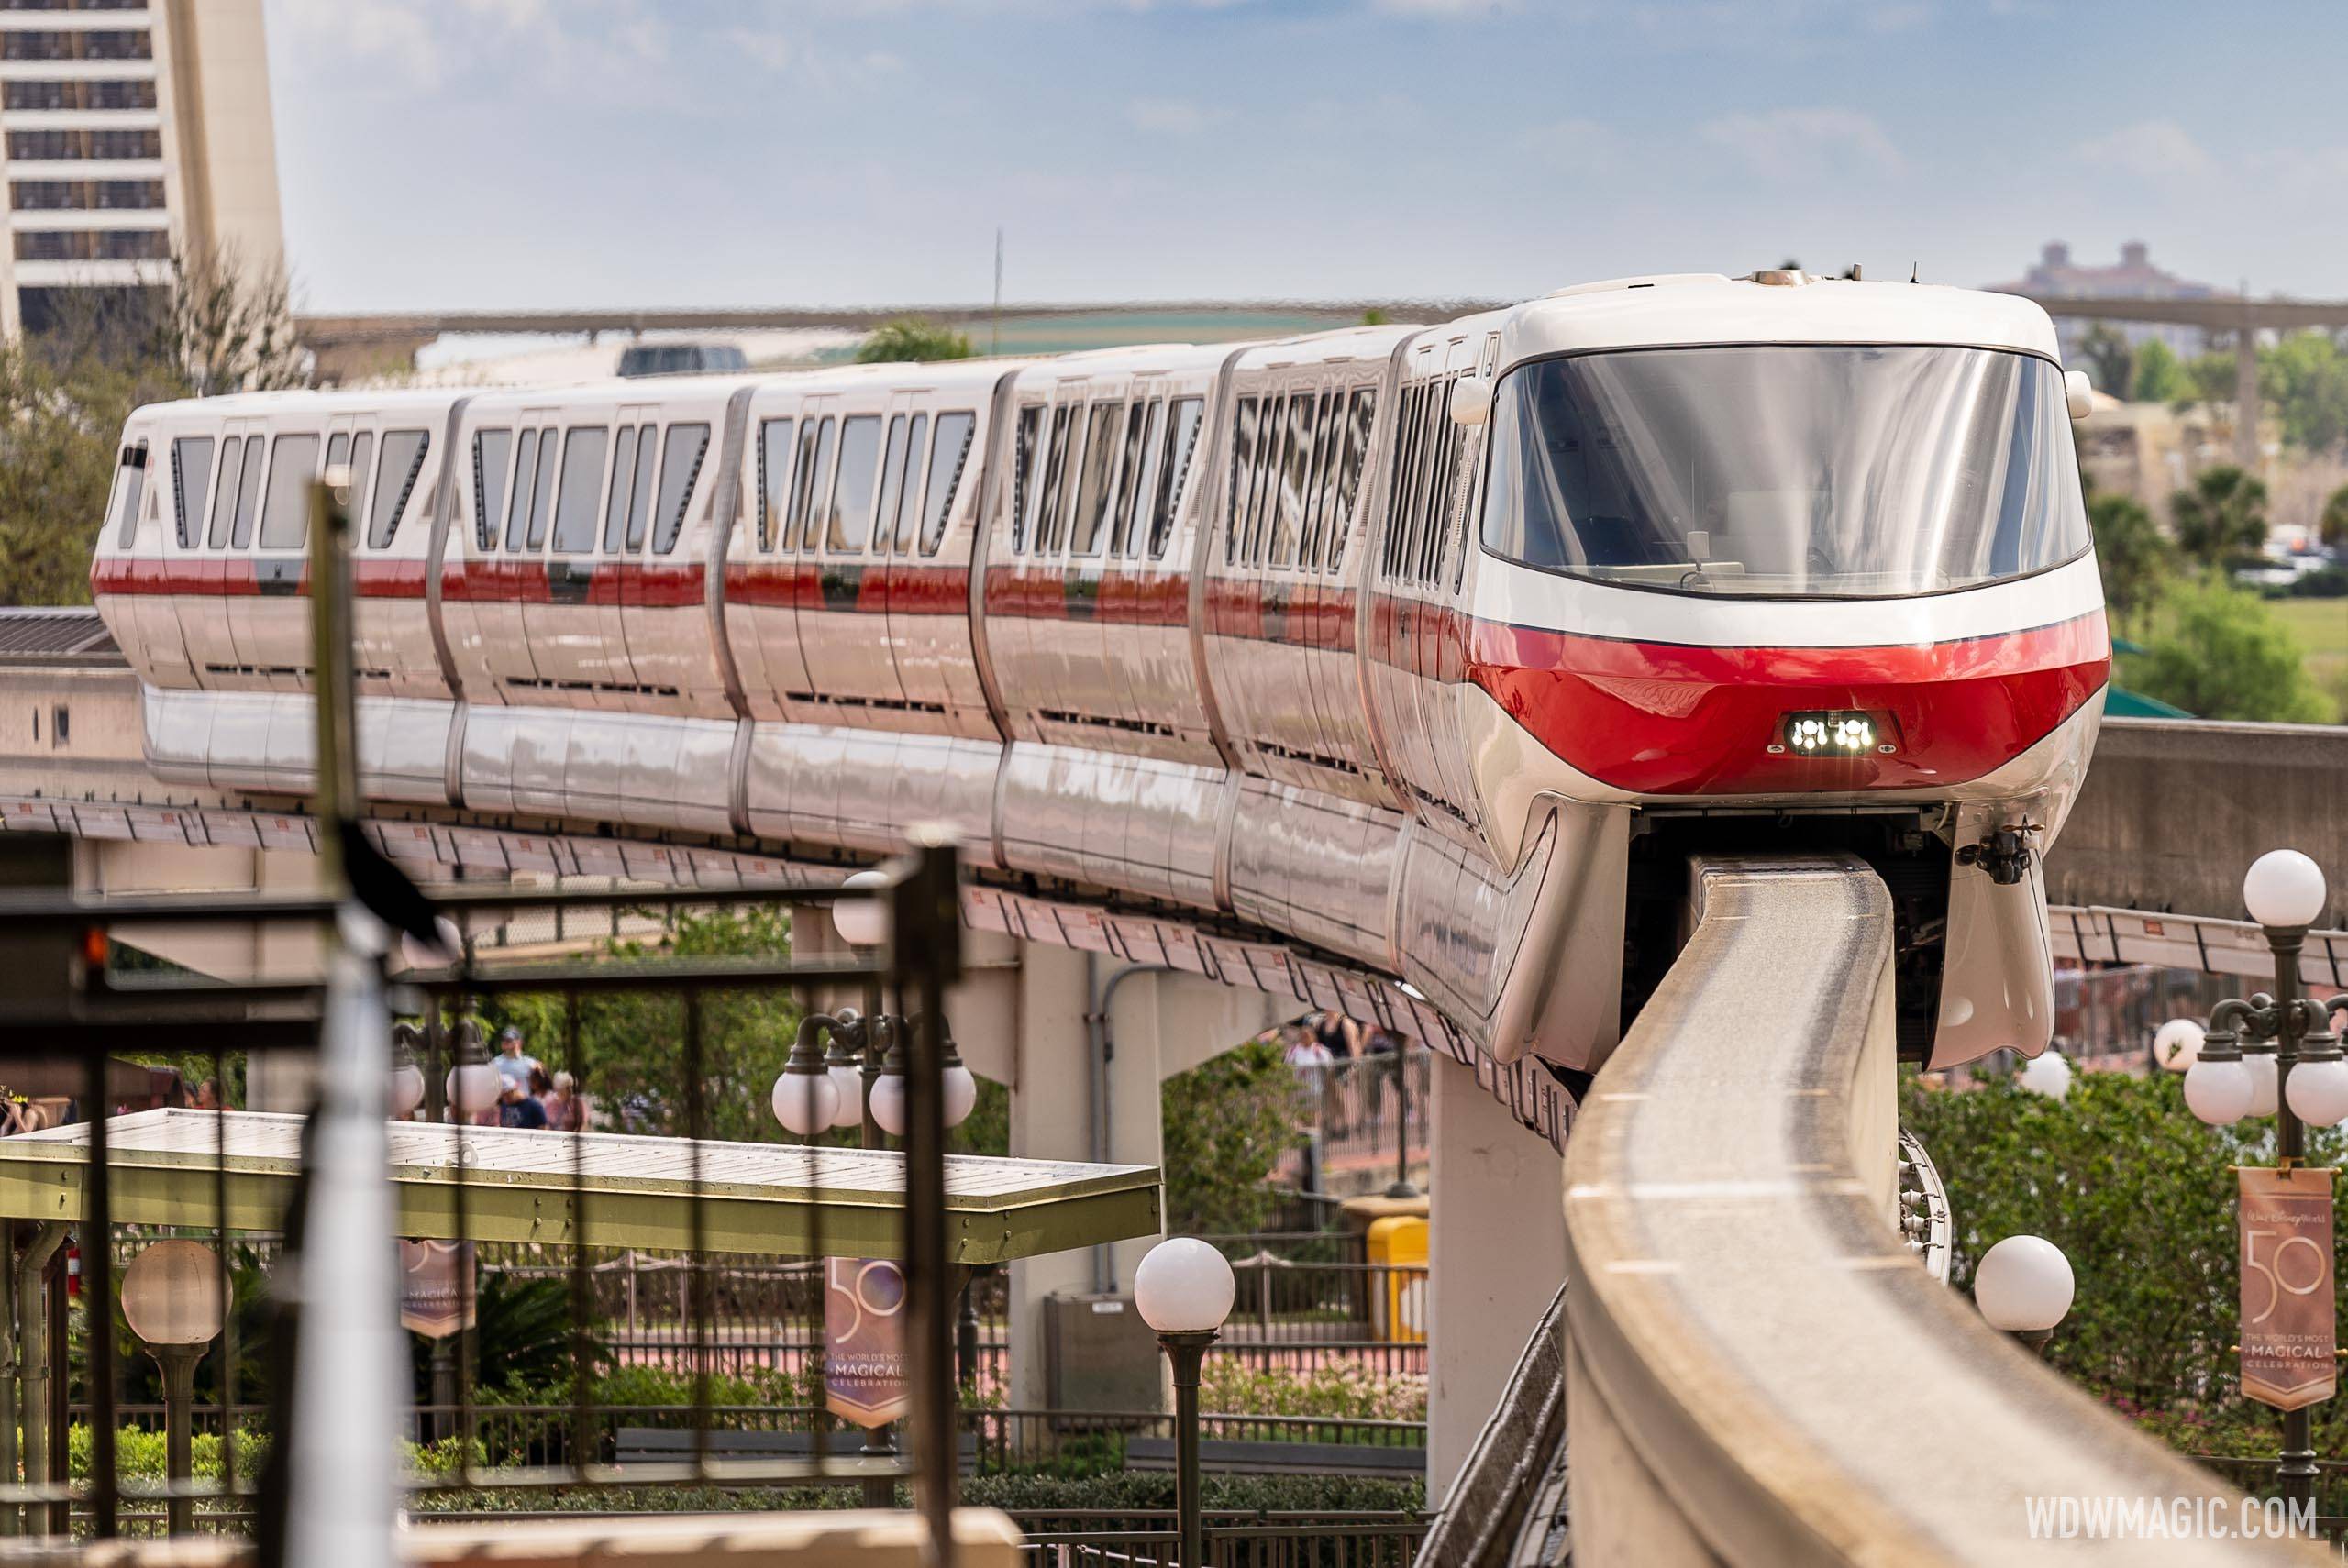 Malcolm Ross, Disney VP talks about monorail expansion